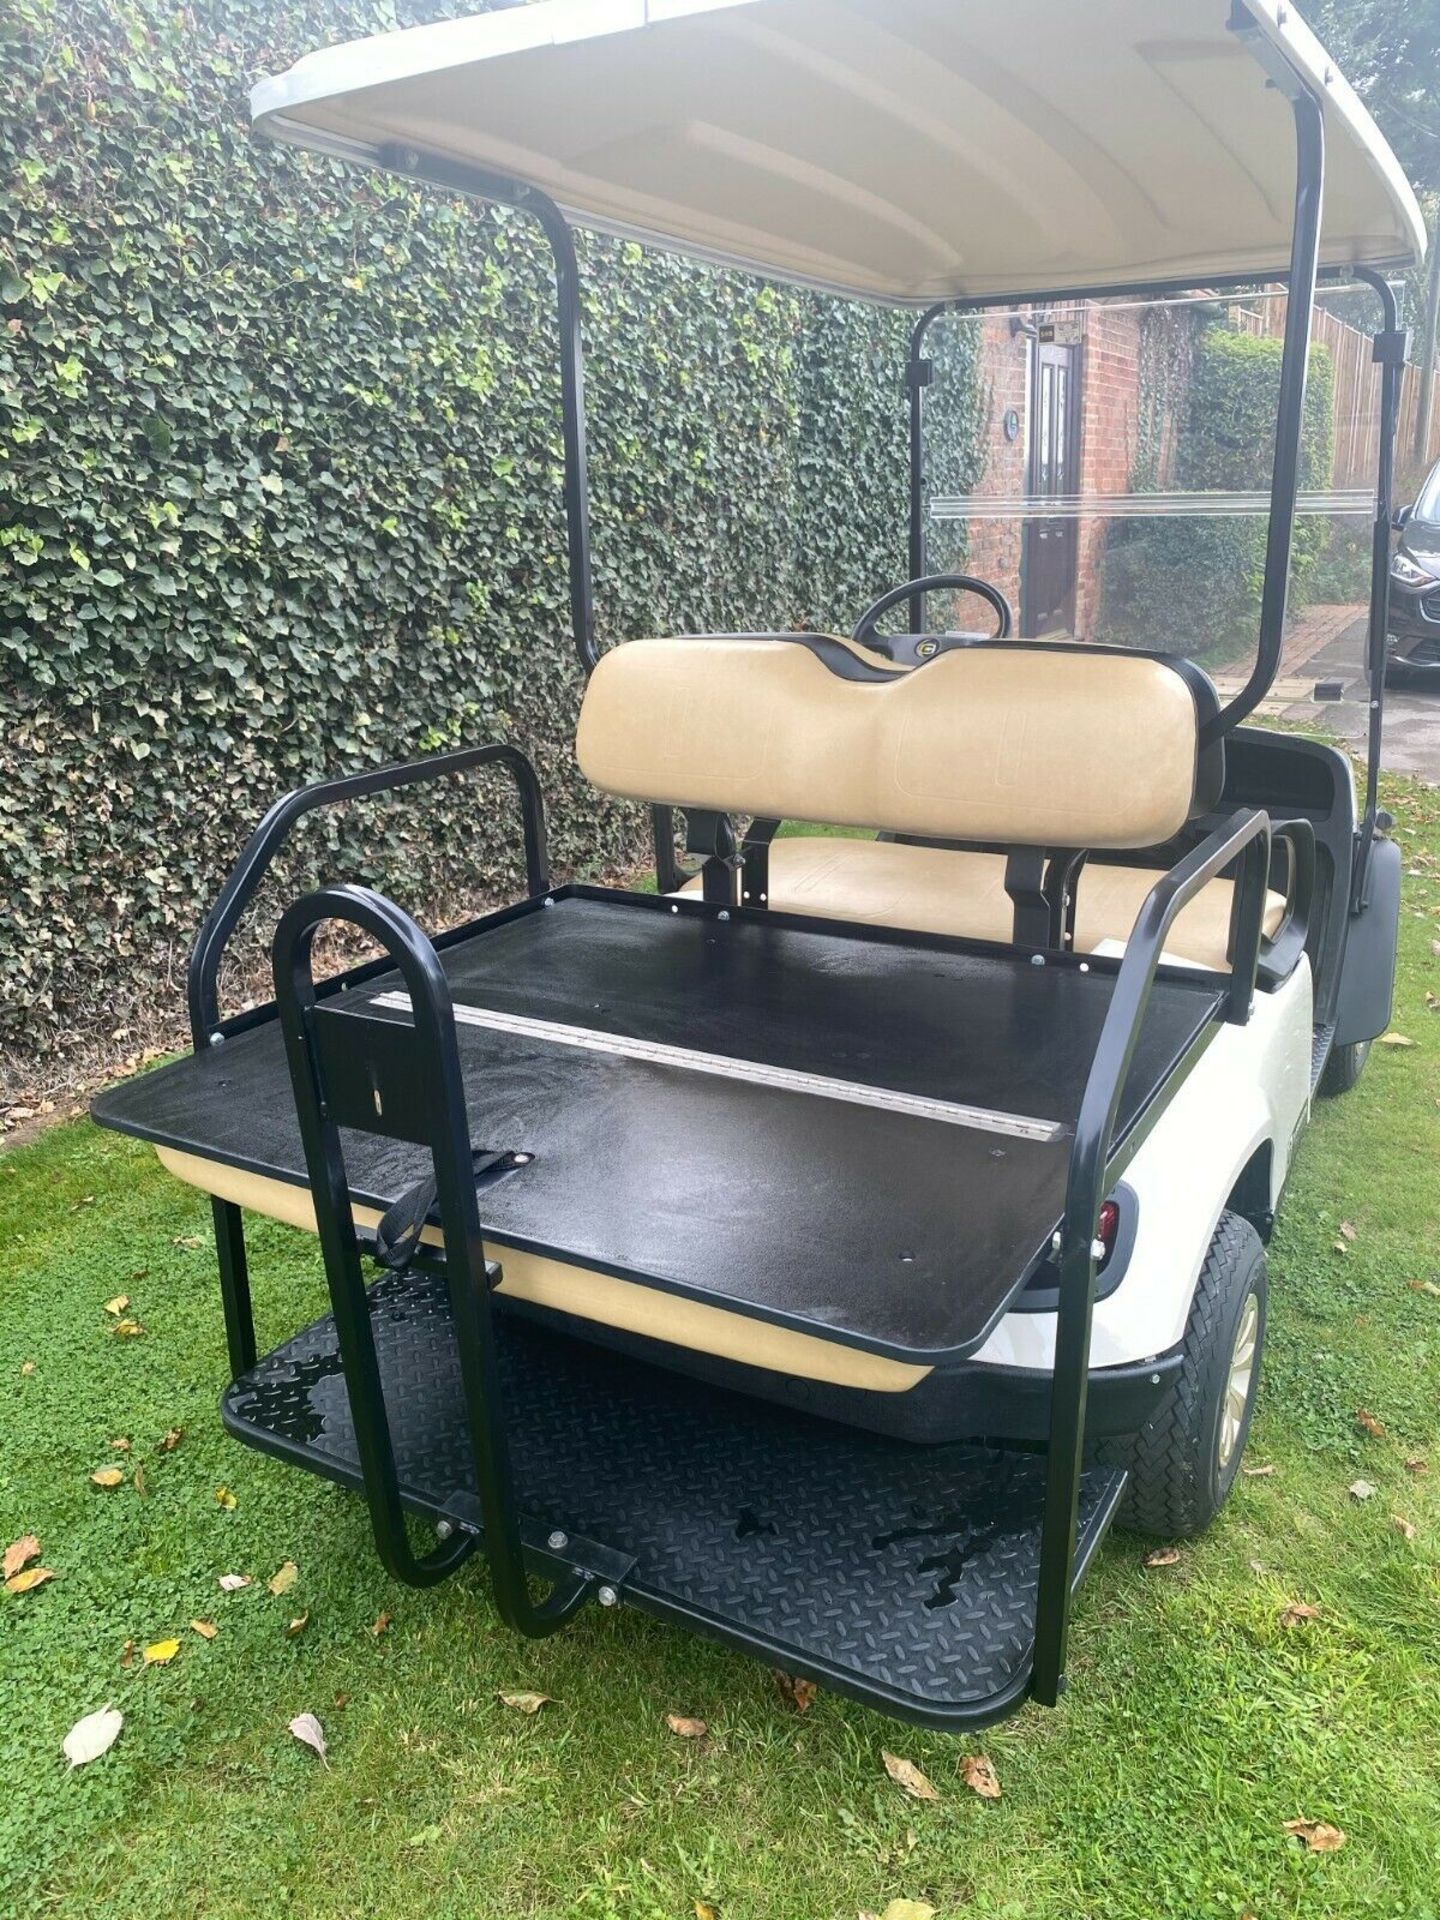 GOLF BUGGY CUSHMAN SHUTTLE 2 + 2, PETROL, 4 SEATER, ONLY 54 HOURS FROM NEW, PUCHASED NEW JUNE 2018 - Image 7 of 11